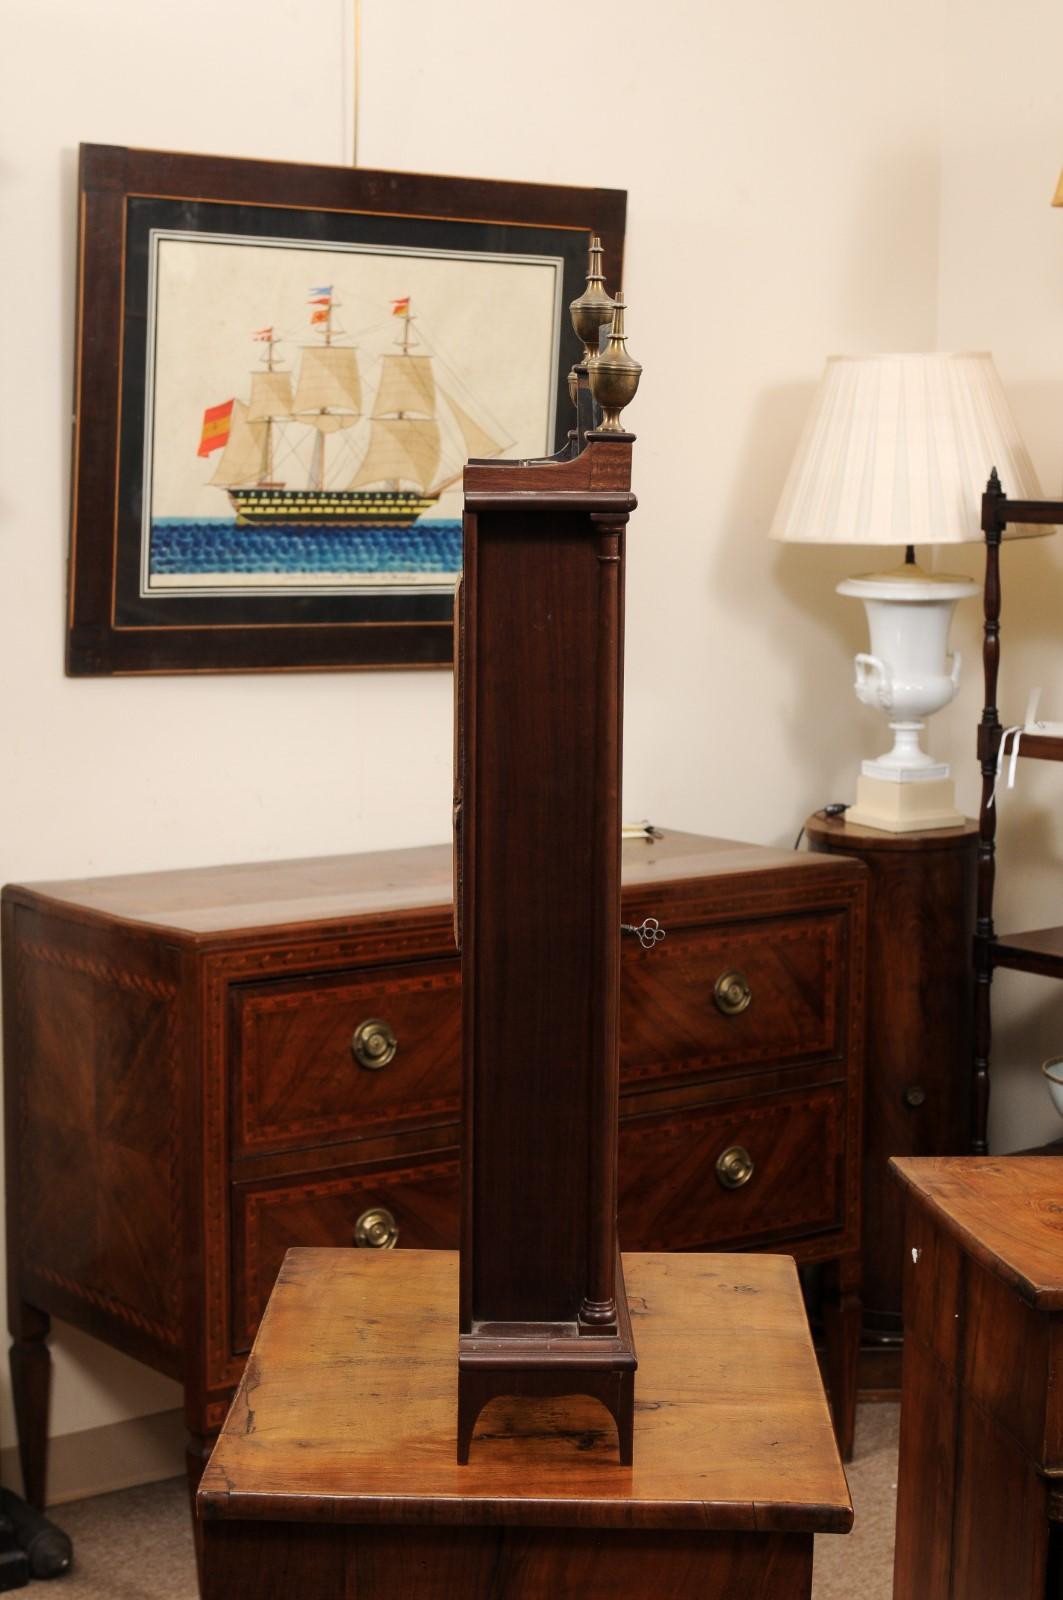 Early 19th Century American Pillar & Scroll Clock in Mahogany For Sale 2